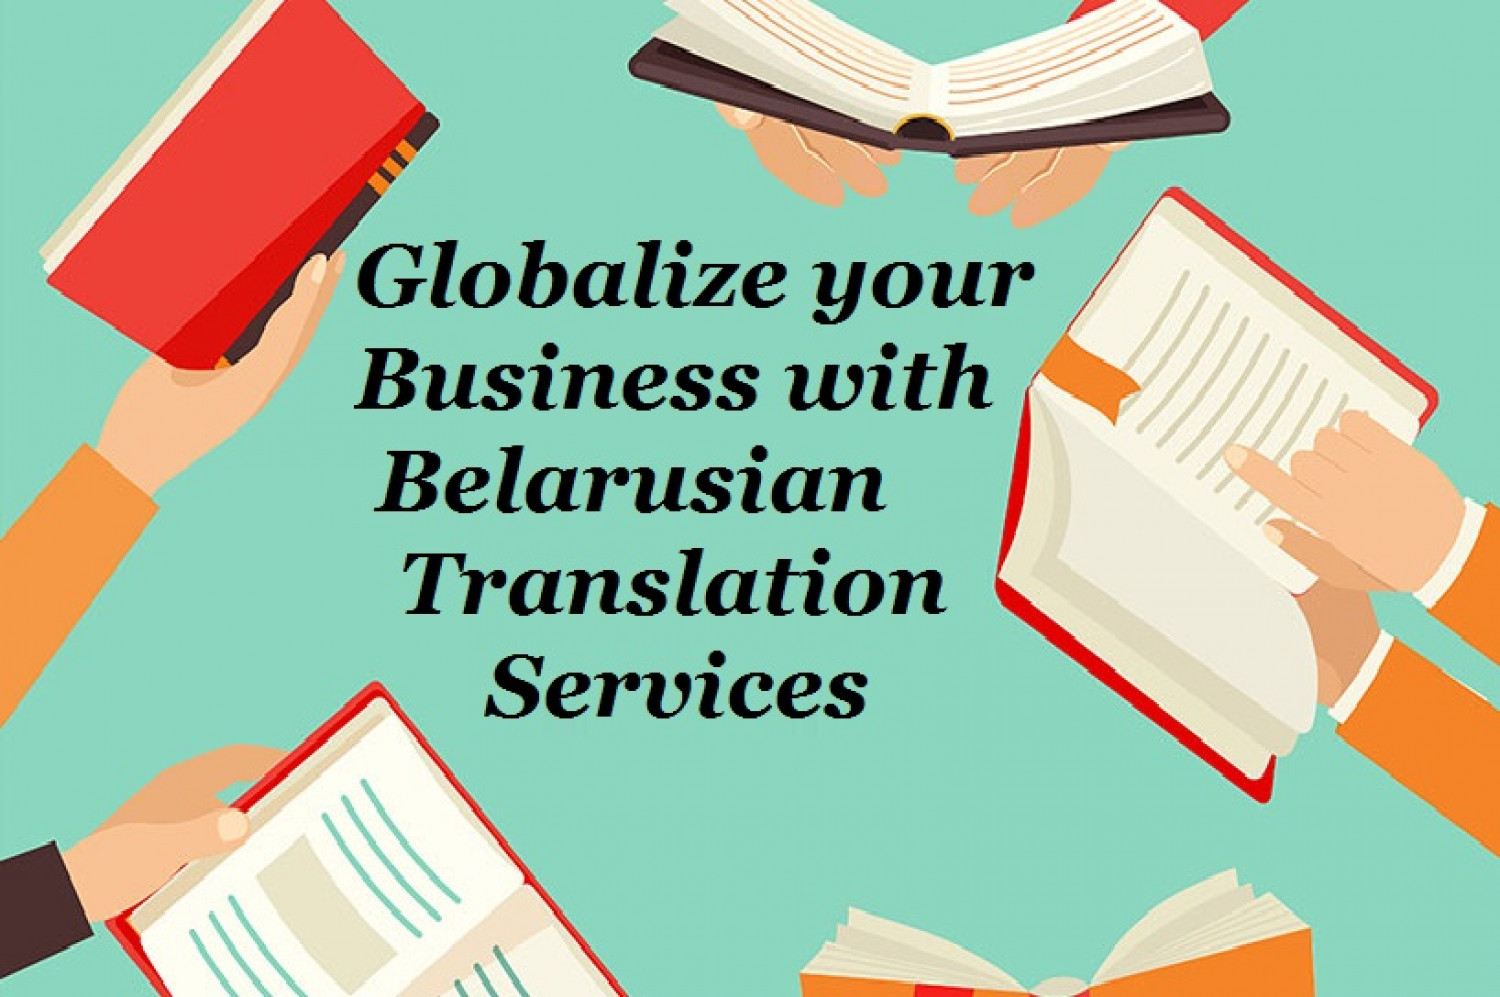 Globalize your Business with Belarusian Translation Services. Infographic